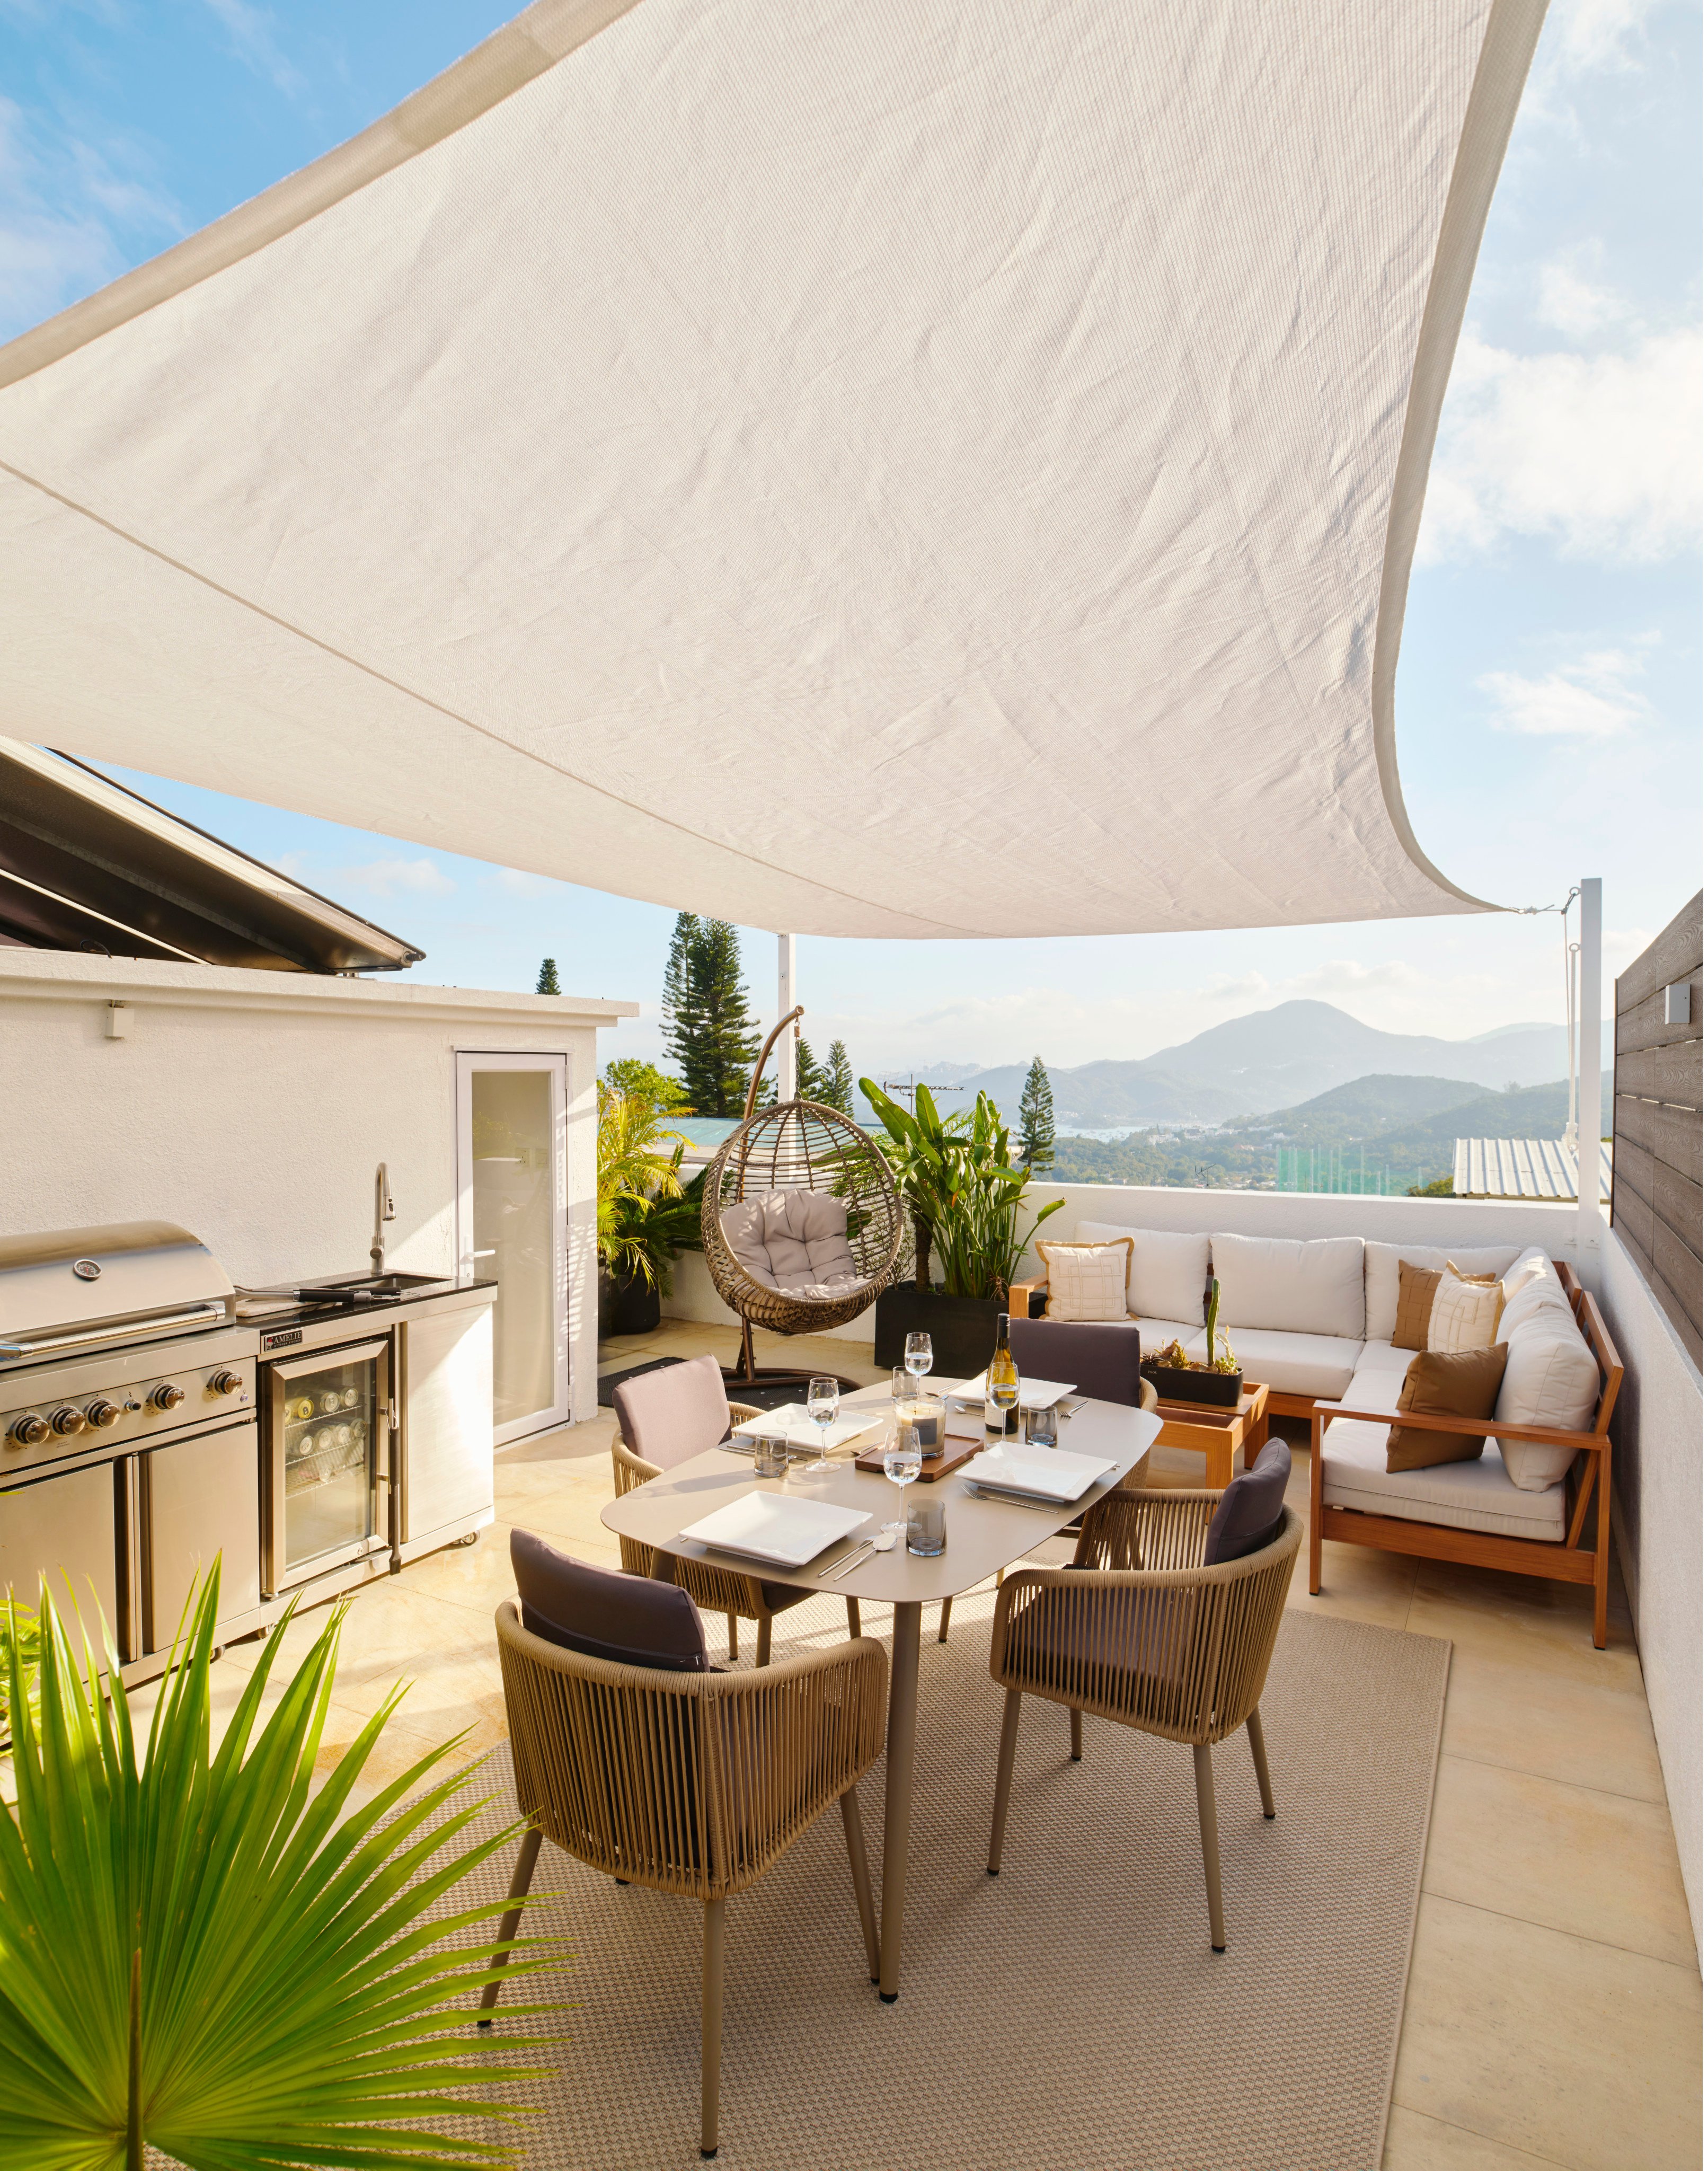 The redesigned rooftop of the house in Sai Kung, Hong Kong. Photo: Steve Wong